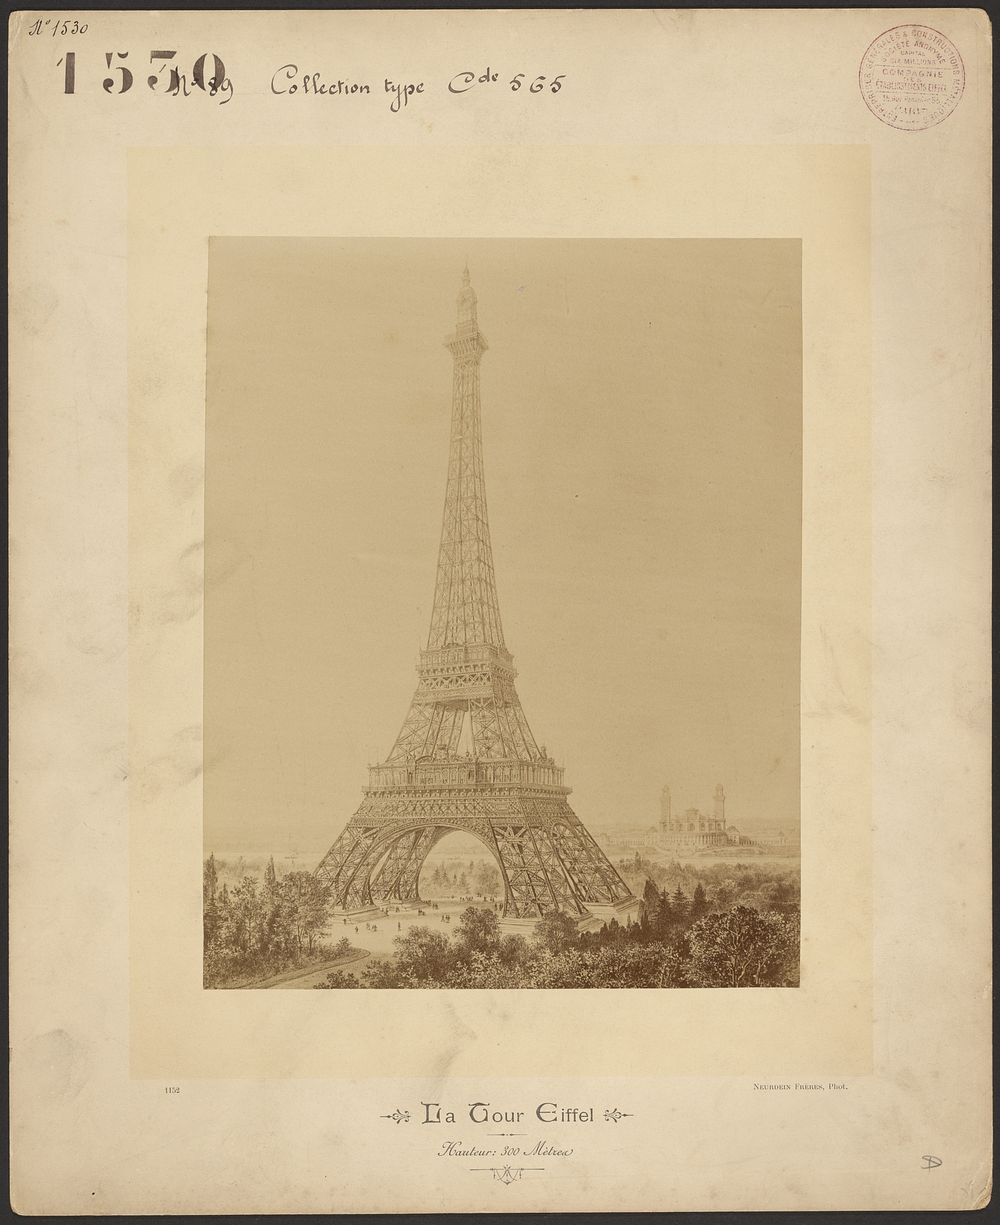 The Eiffel Tower (photograph of a drawing of the completed tower) by Étienne Neurdein